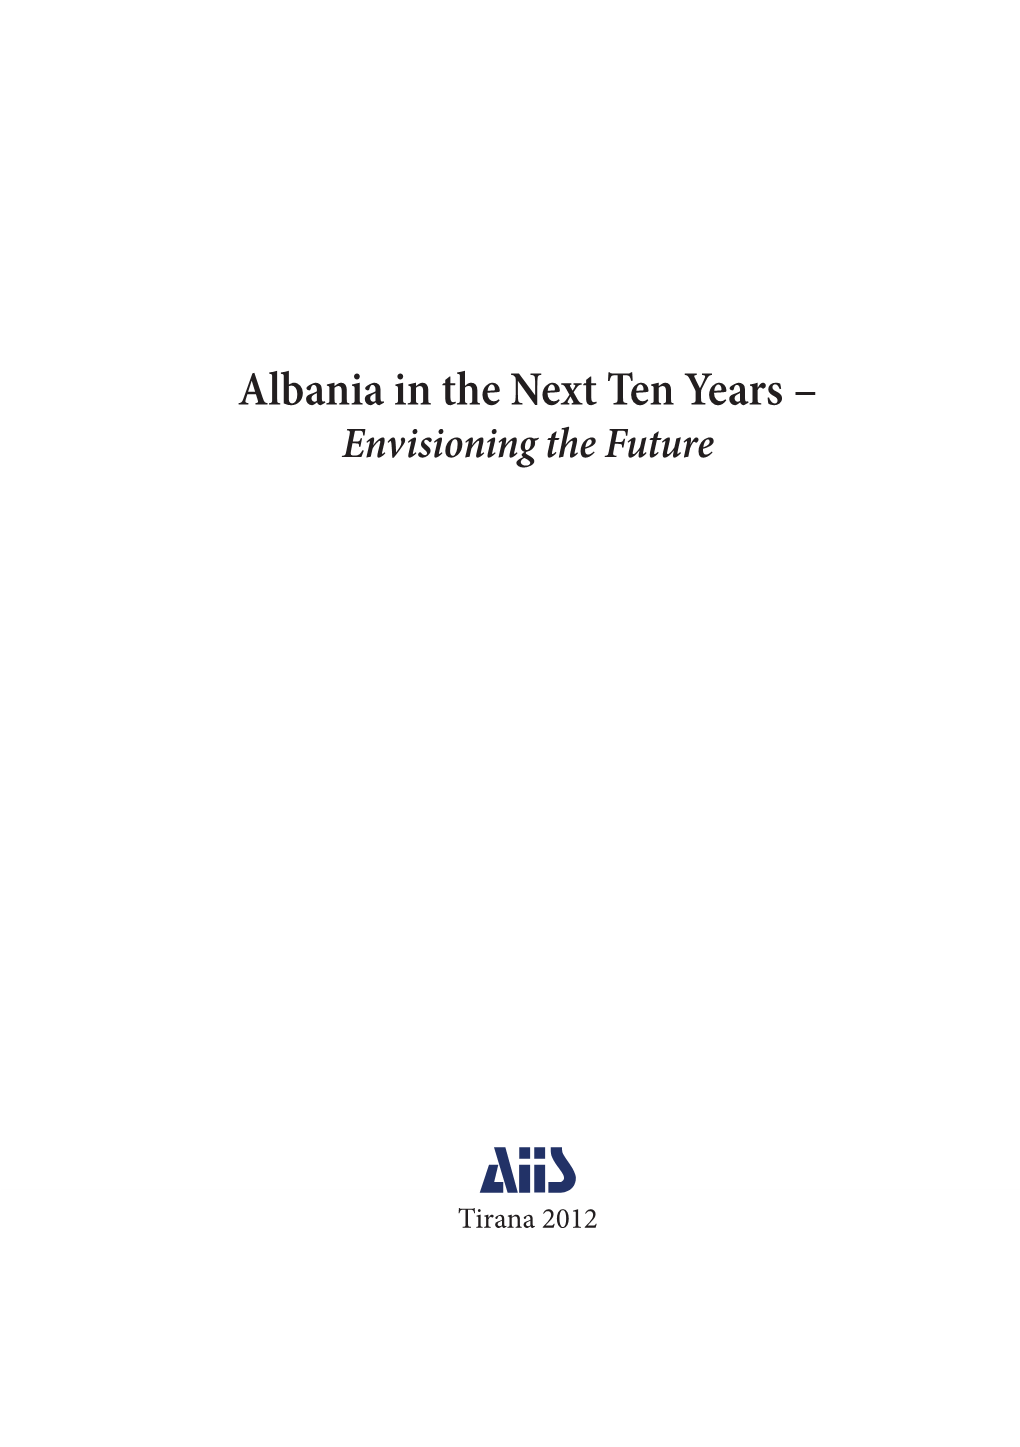 Albania in the Next Ten Years – Envisioning the Future